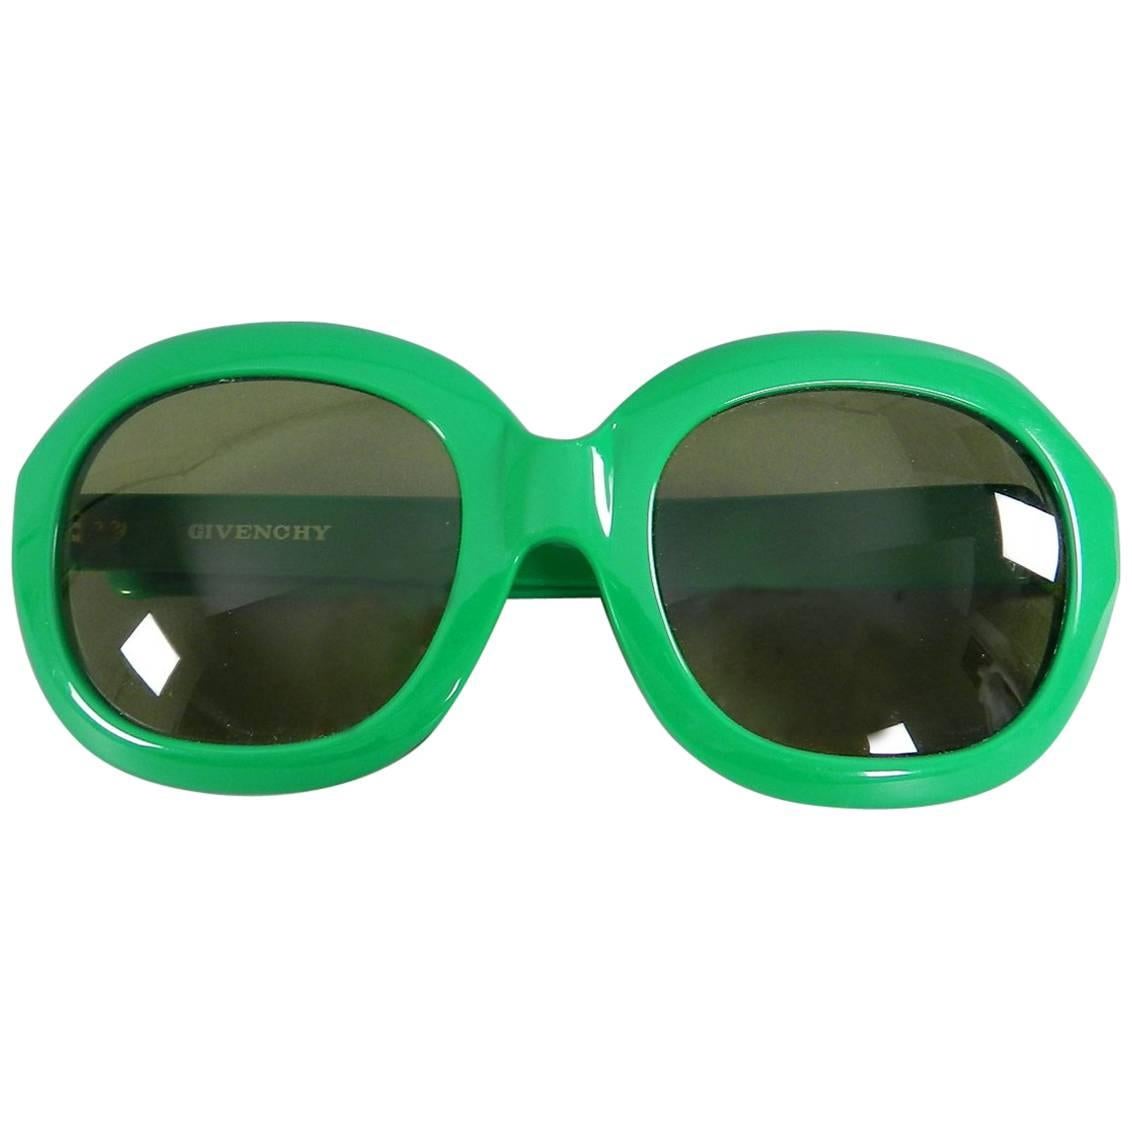 Vintage 1970's Givenchy Green Oversized Sunglasses